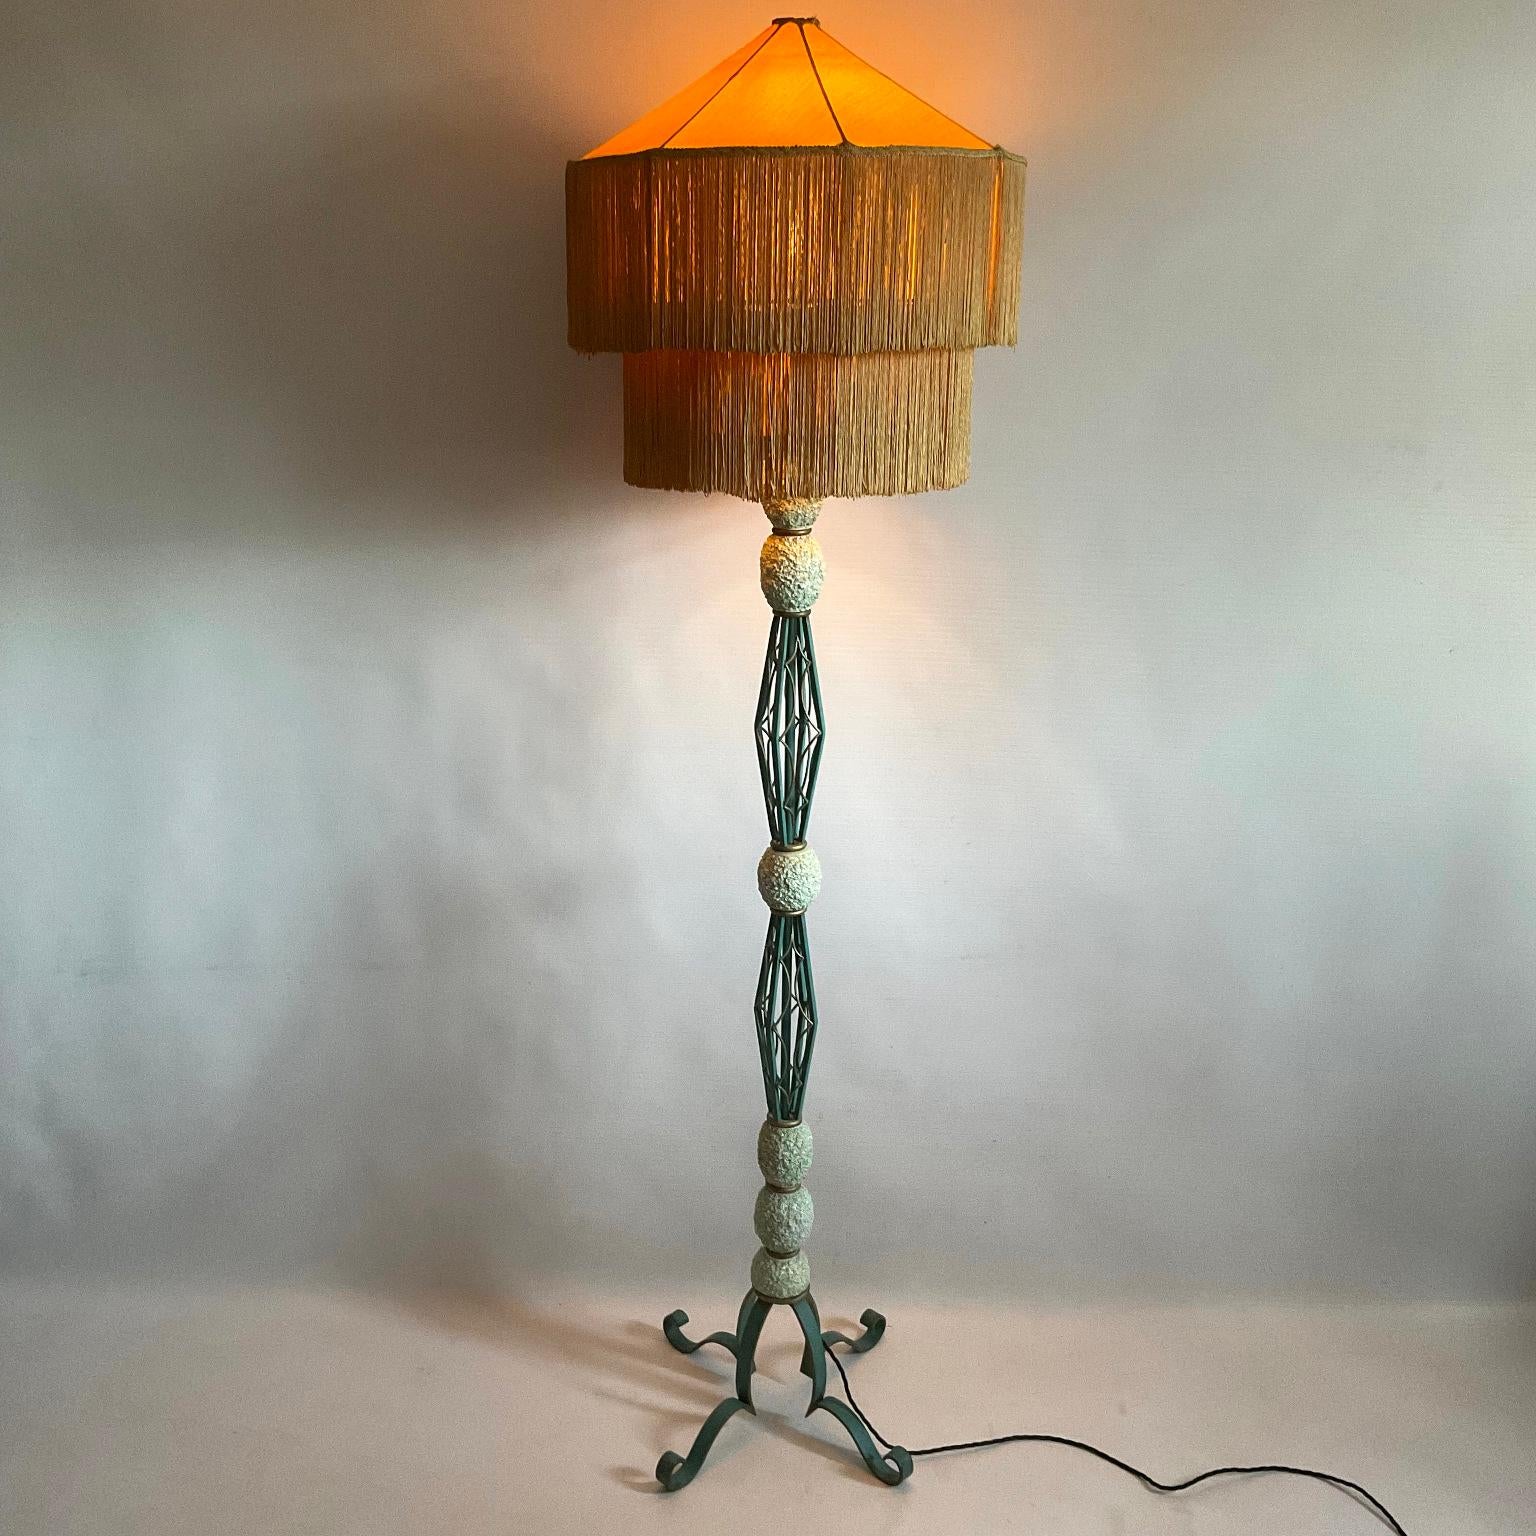 1940s French Wrought Iron Floor Lamp with Turquoise and Gold Enamel Finish  3